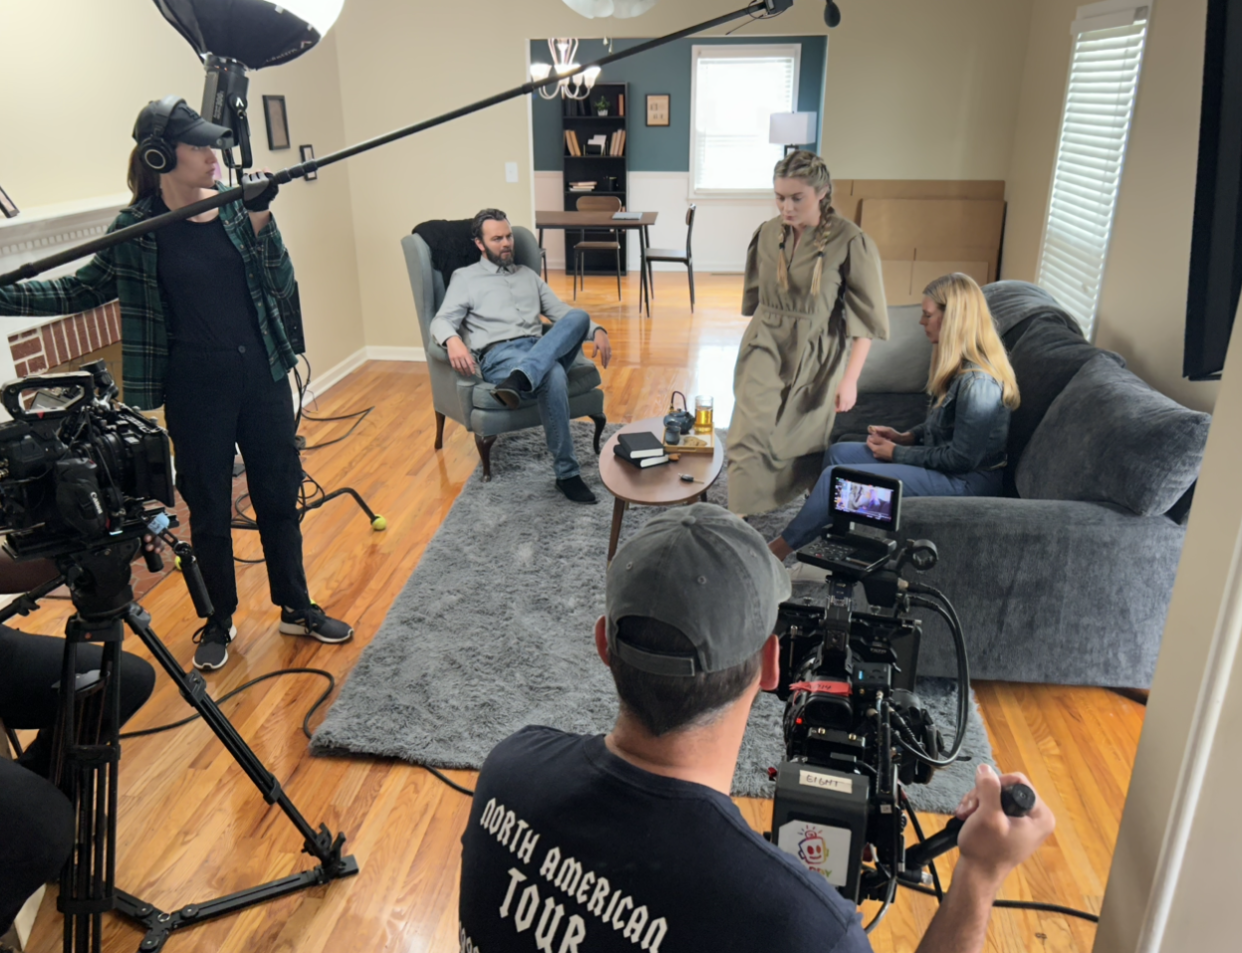 Scenes for Beyond Casual Media's production of The Observance, a psychological thriller, were filmed recently at two locations in Wrens.